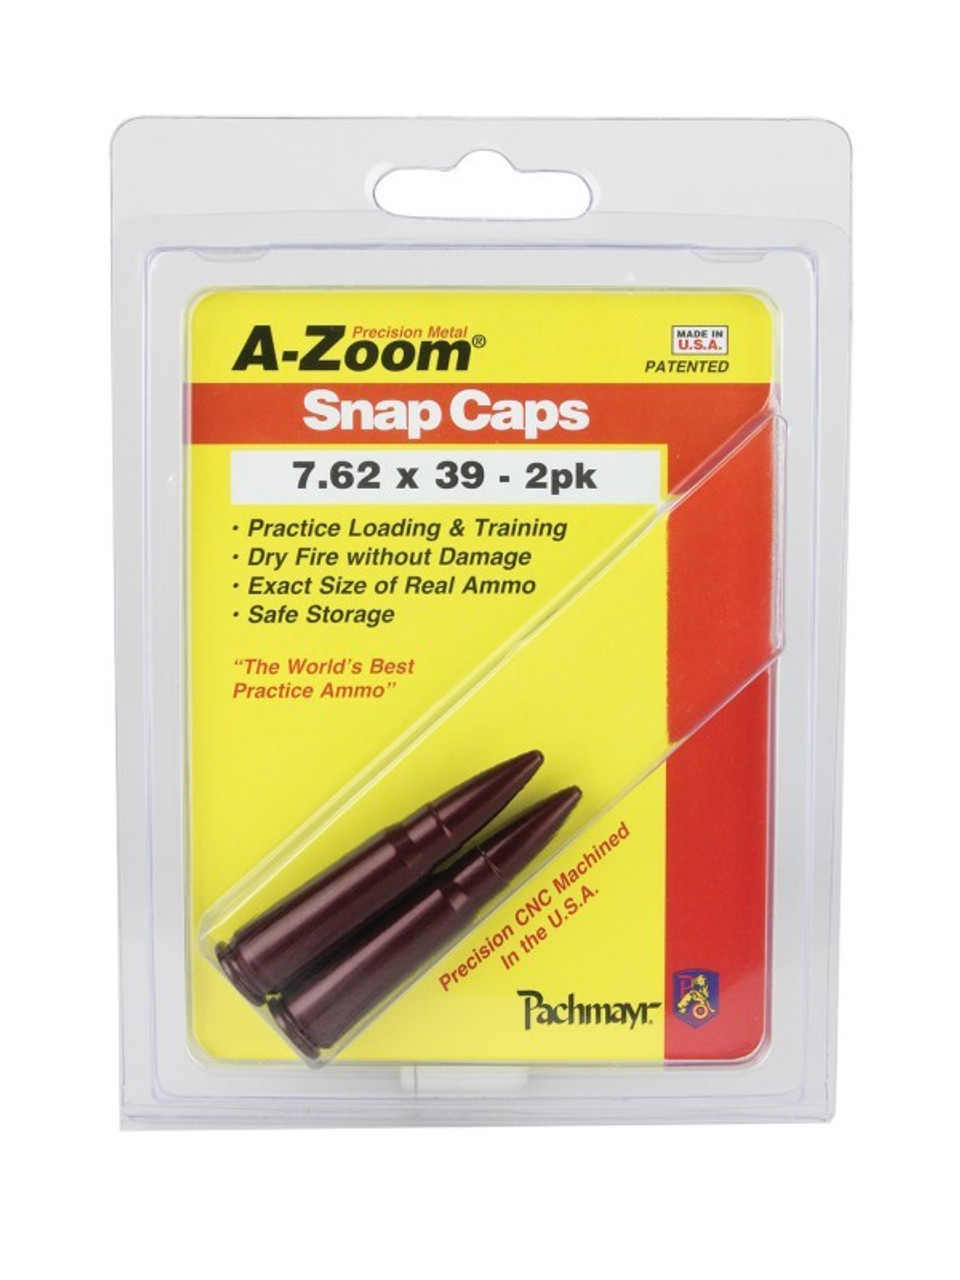 A-Zoom 7.62×39 Snap Caps – 2Pk

Every A-Zoom snap cap is CNC machined from a solid billet of aluminum to precise cartridge dimensions, then hard anodized for ultra-smooth functioning and extended life span. Each snap cap cartridge utilizes a “Dead Cap” where the primer would be that is designed to withstand thousands of dry fires. A-Zoom snap caps are more durable than its plastic counterparts and built to spec so that they function through your gun just like real ammunition.

Take your training to the next level by being able to dry fire your firearm without damaging your firing pin. Familiarize yourself or new shooters with your firearms before a round ever gets fired. This is a great teaching tool to introduce a first time shooter to the sport and get them comfortable with the handling and safety aspects before ever putting a live firearm in their hands.

Item Number: 12234